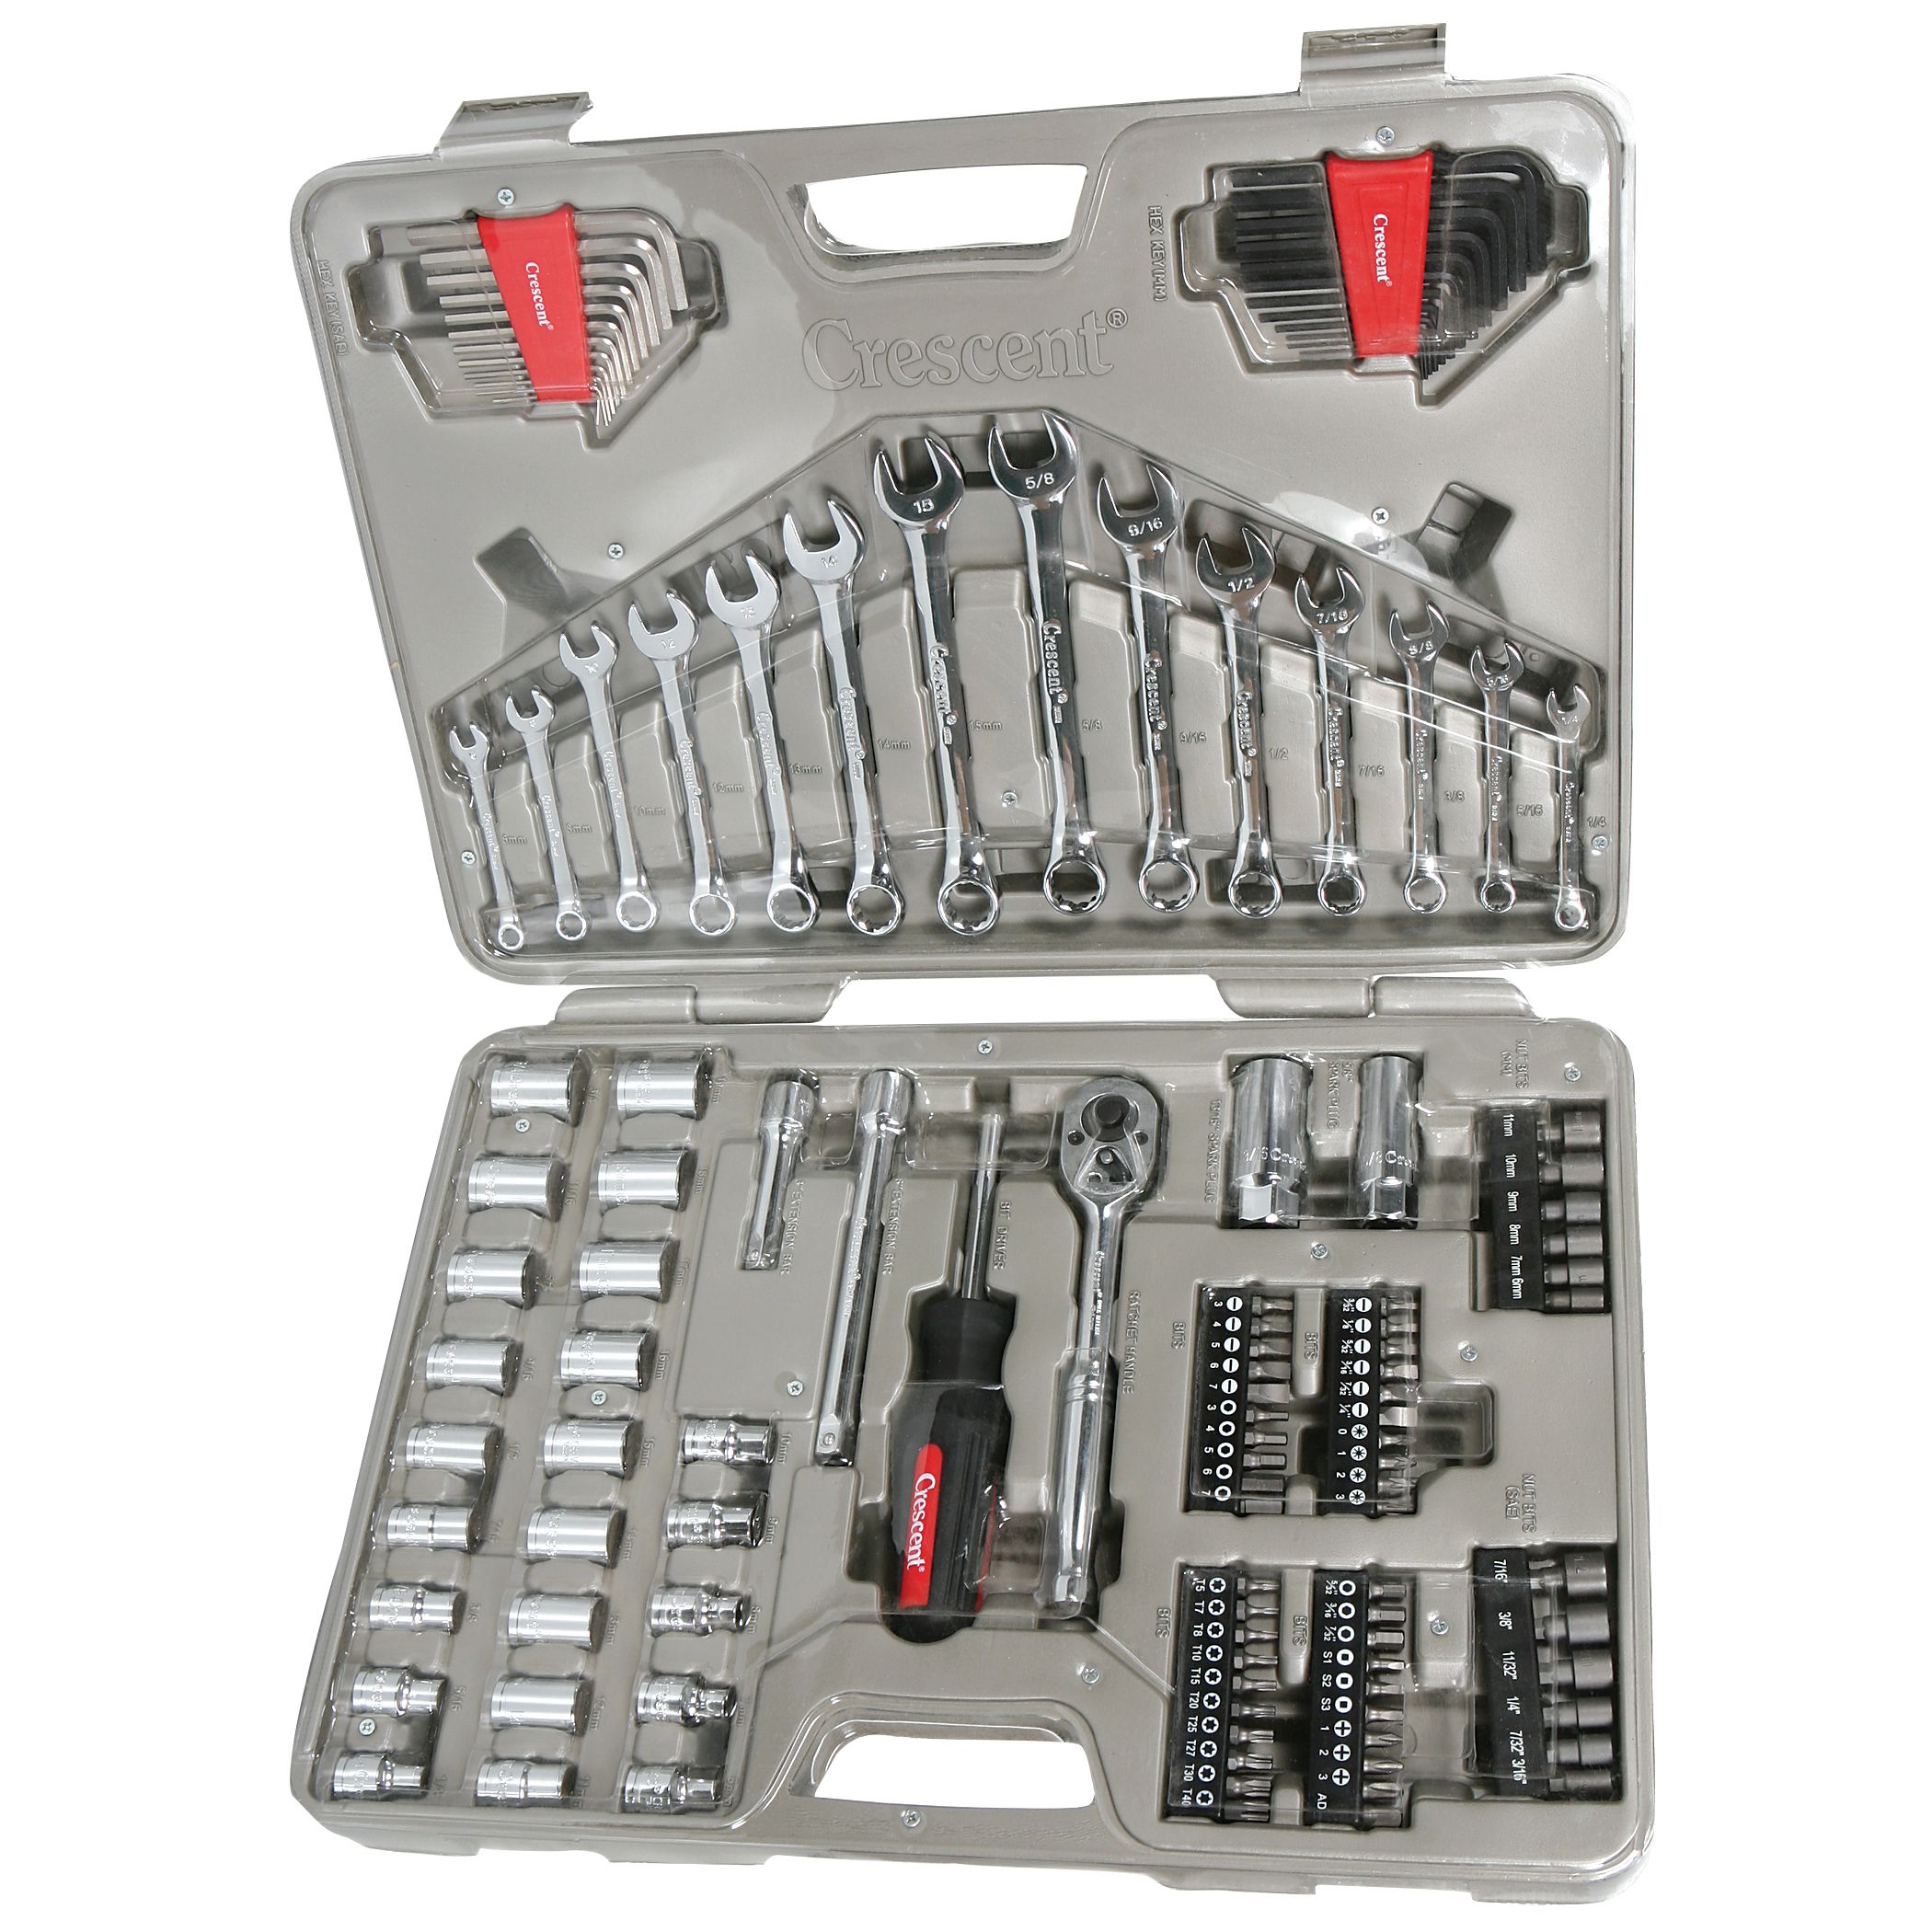 CTK90 Crescent 90 Piece Mechanics Tool Set with Ratcheting Wrenches SAE & Metric 